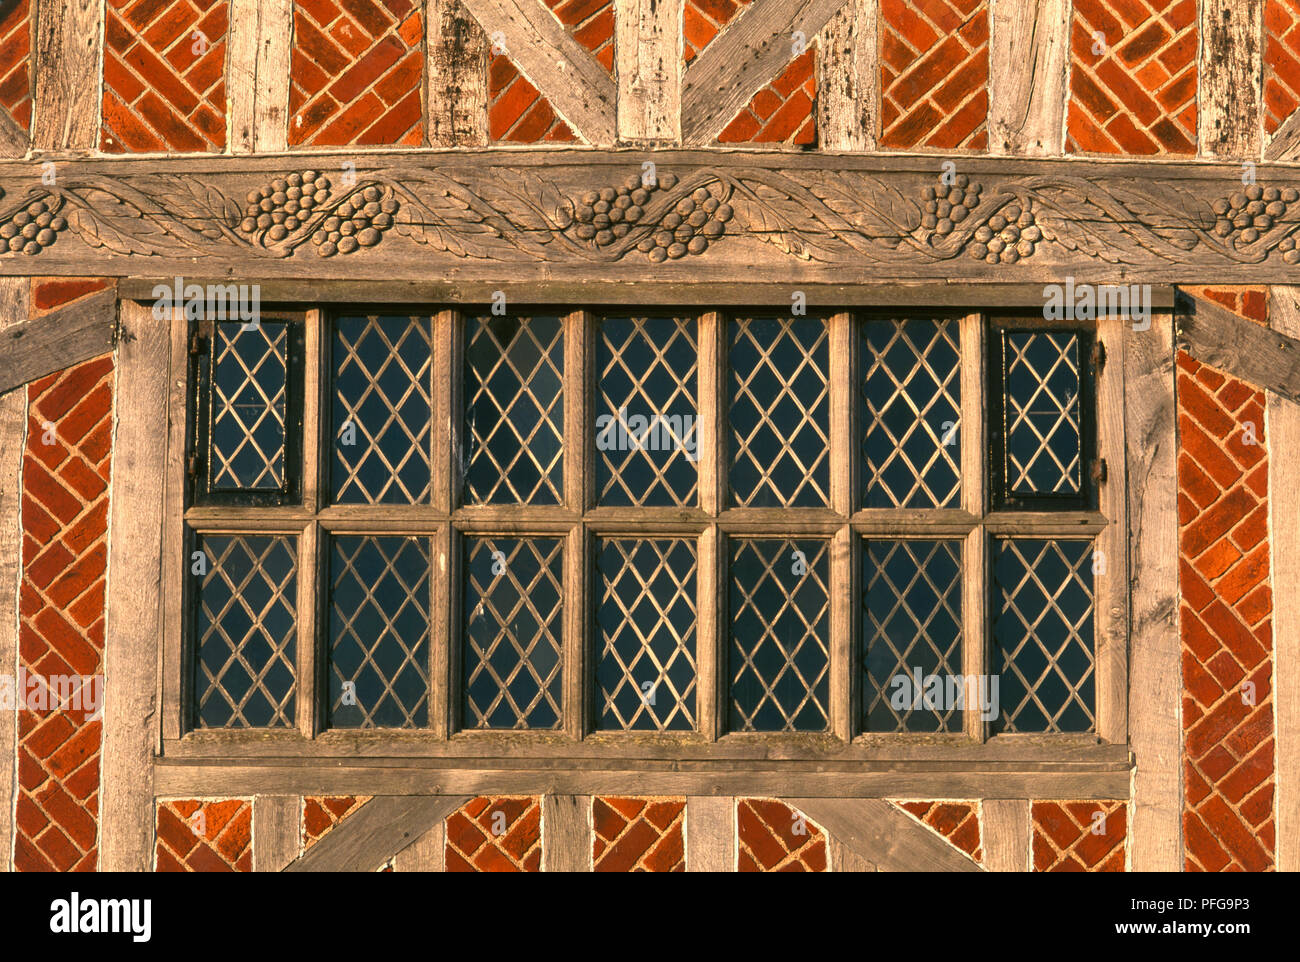 Great Britain, England, Suffolk, Aldeburgh, 16th century Moot Hall, facade detail showing window and timber frame, close-up Stock Photo